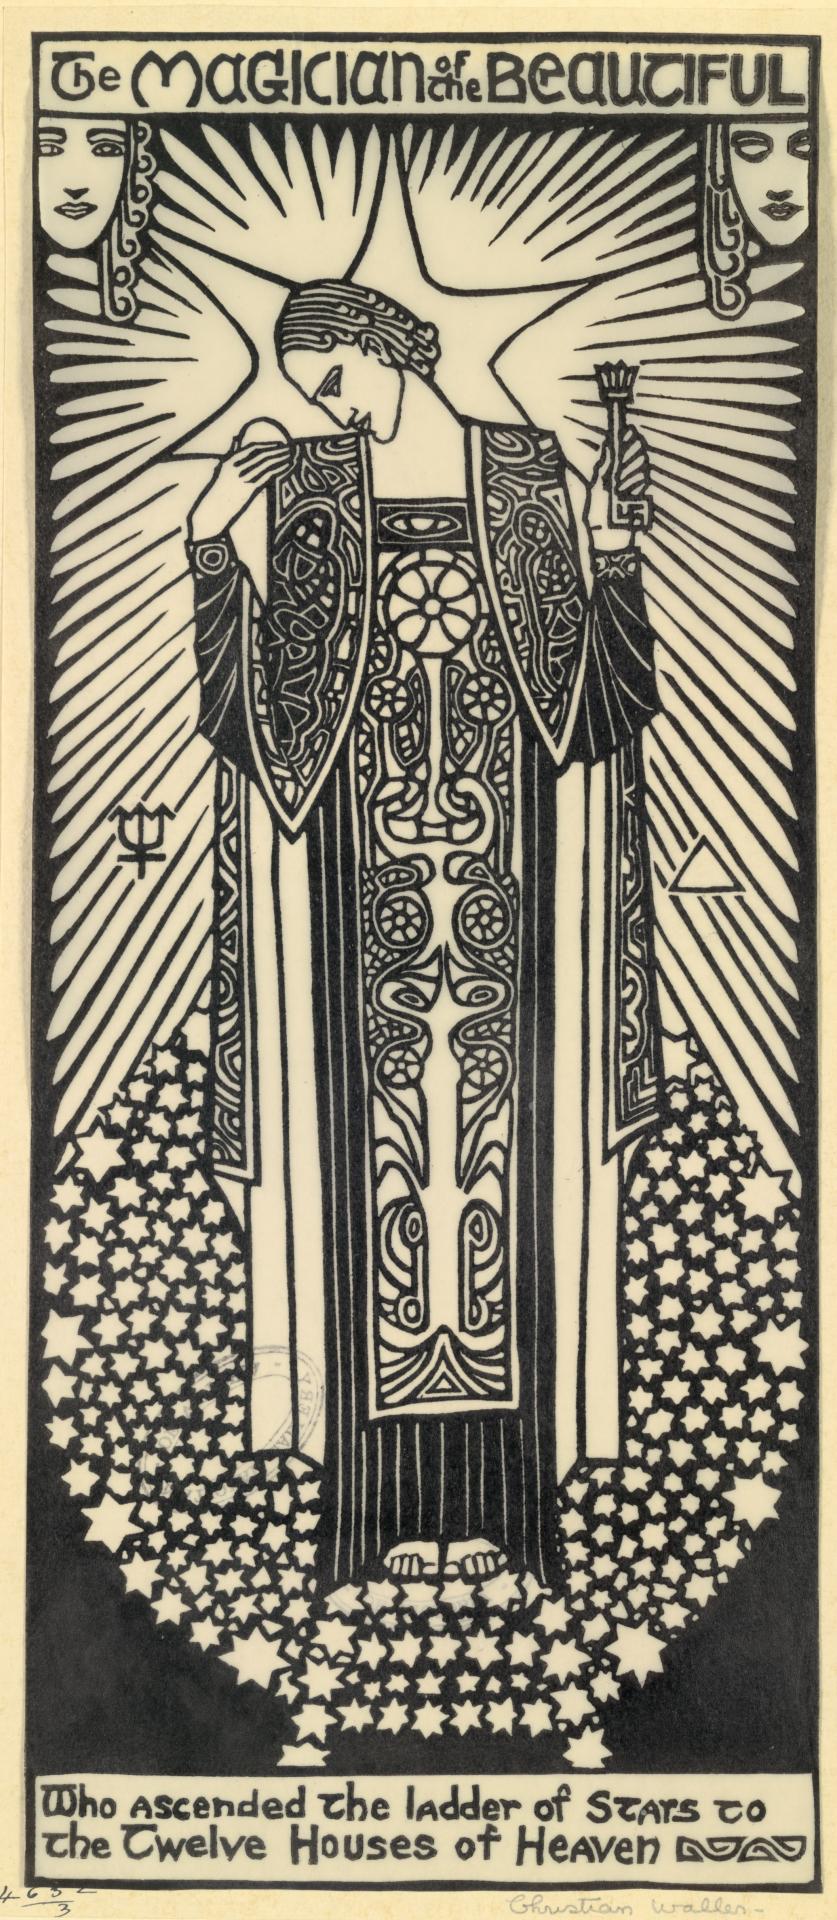 Christian Waller, <em>The magician of the beautiful</em>, 1932, linocut on transfer paper, 31.6 × 13.4 cm (image) 32.6 × 14.6 cm (sheet) 51.8 × 33.7 cm (secondary support), National Gallery of Victoria, Copyright Estate of Christian Waller